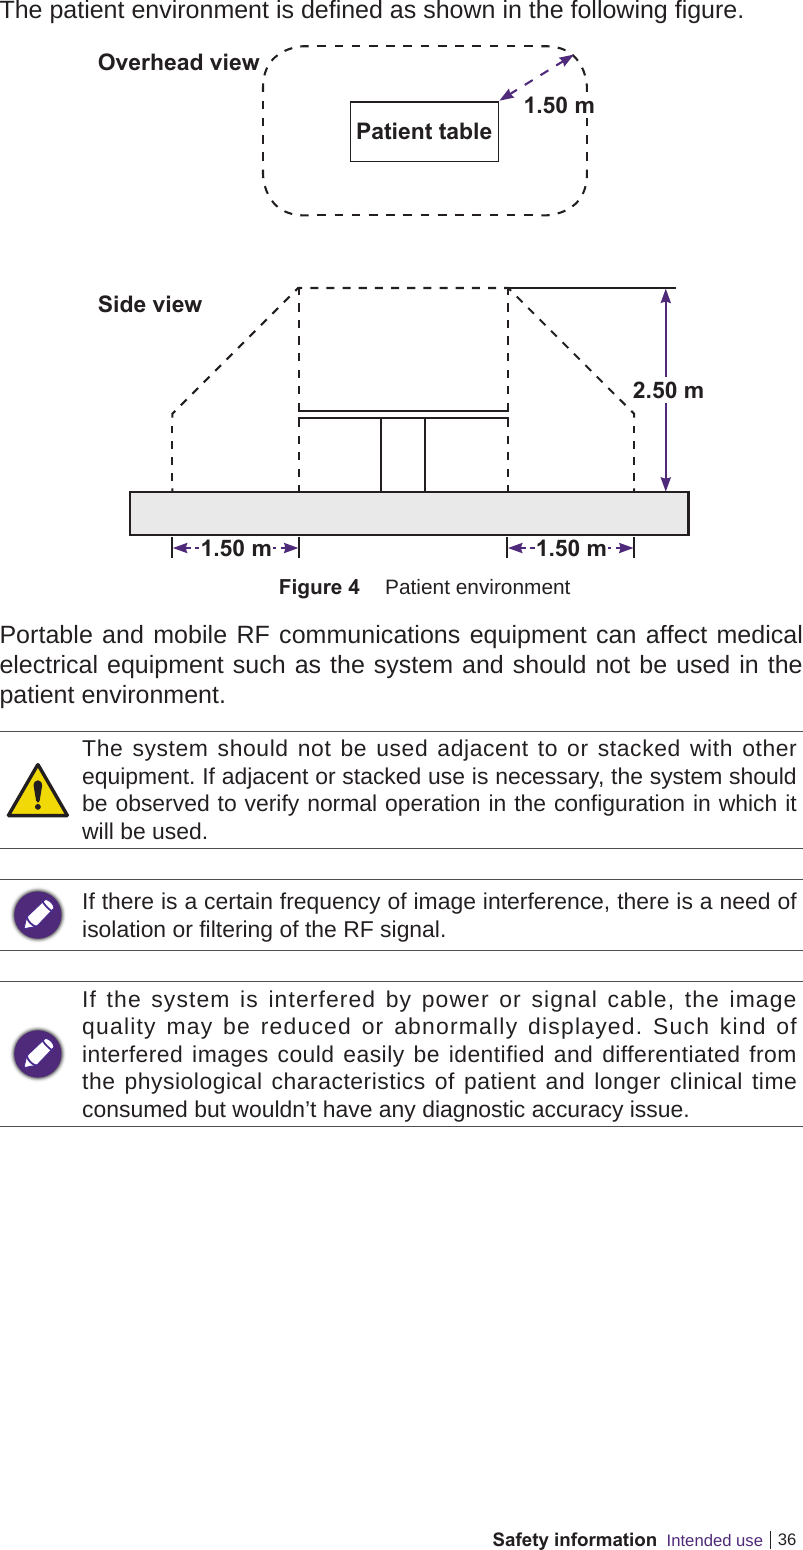 36Safety information  Intended useThe patient environment is defined as shown in the following figure.Patient table1.50 m2.50 m1.50 mOverhead viewSide view1.50 mFigure 4  Patient environmentPortable and mobile RF communications equipment can affect medical electrical equipment such as the system and should not be used in the patient environment.The system should not be used adjacent to or stacked with other equipment. If adjacent or stacked use is necessary, the system should be observed to verify normal operation in the configuration in which it will be used.If there is a certain frequency of image interference, there is a need of isolation or filtering of the RF signal.If the system is interfered by power or signal cable, the image quality may be reduced or abnormally displayed. Such kind of interfered images could easily be identified and differentiated from the physiological characteristics of patient and longer clinical time consumed but wouldn’t have any diagnostic accuracy issue.